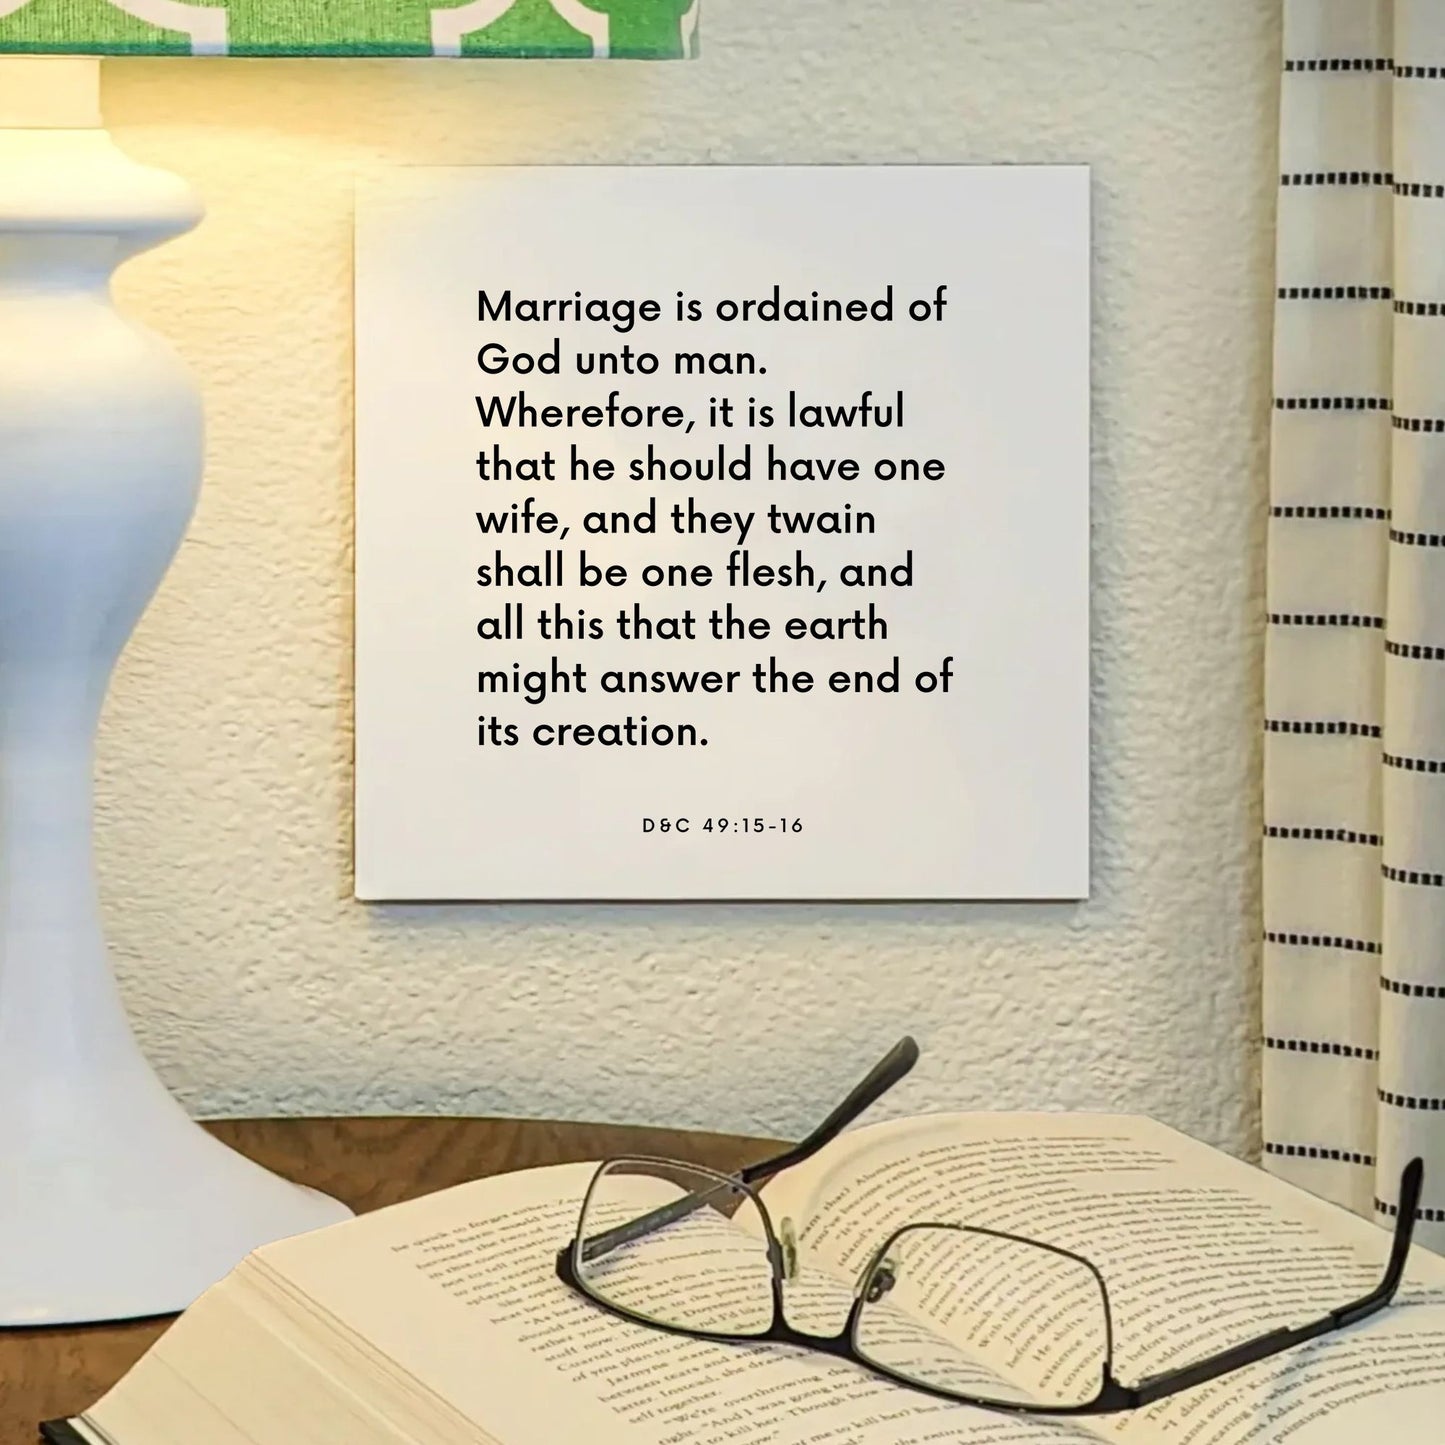 Lamp mouting of the scripture tile for D&C 49:15-16 - "Marriage is ordained of God unto man"